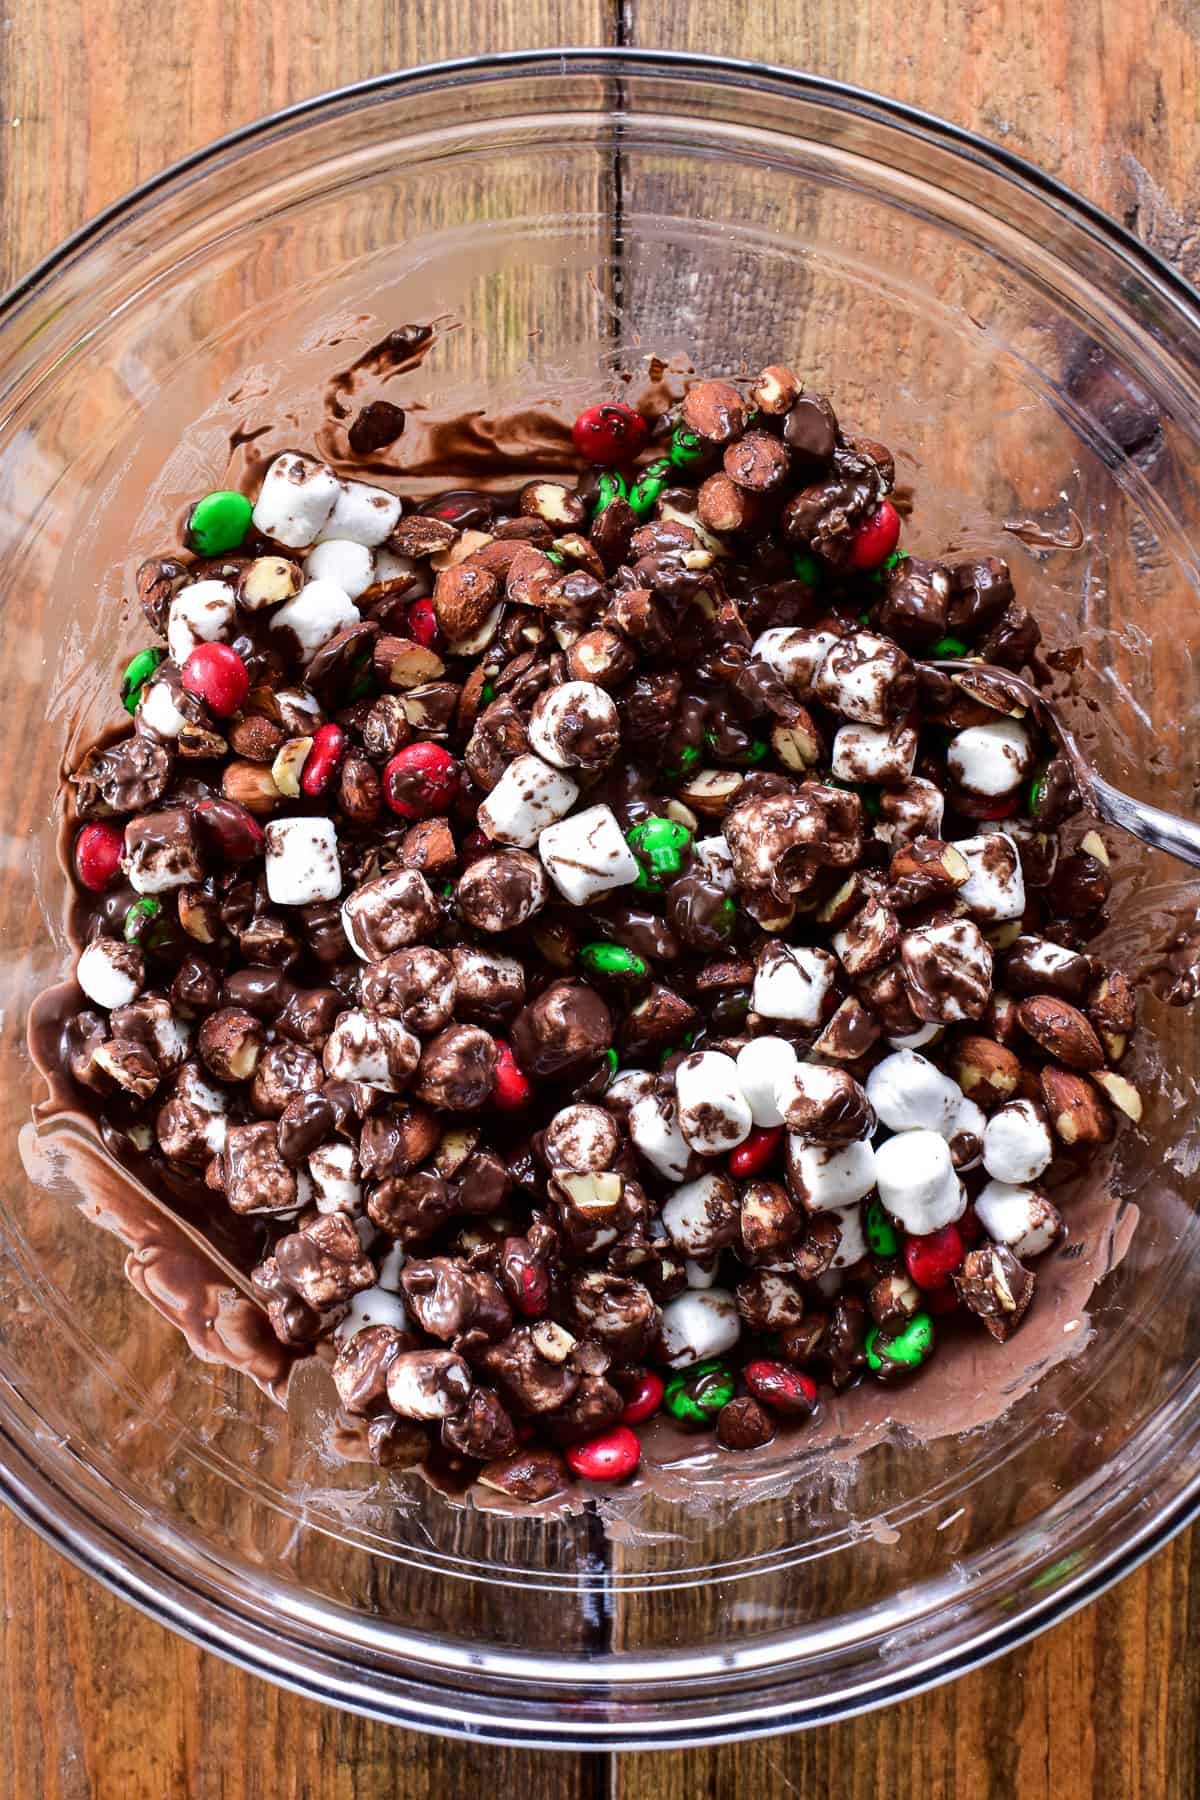 Rocky Road ingredients in a mixing bowl